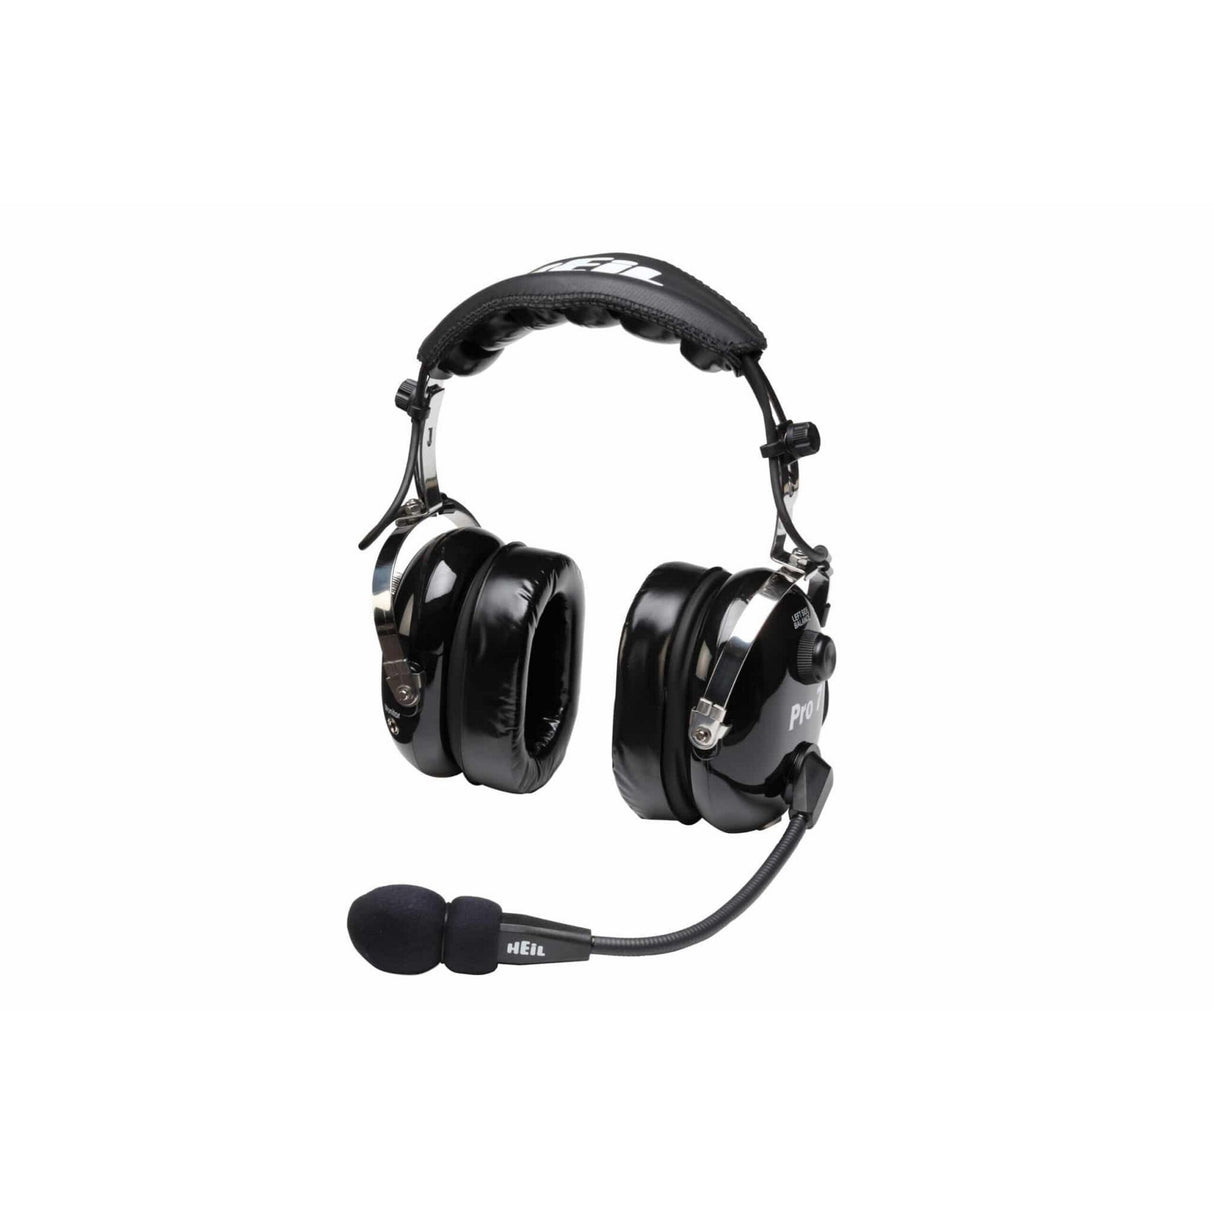 Heil Sound PRO7-ICBK Industrial Headset with Electret Element, Black